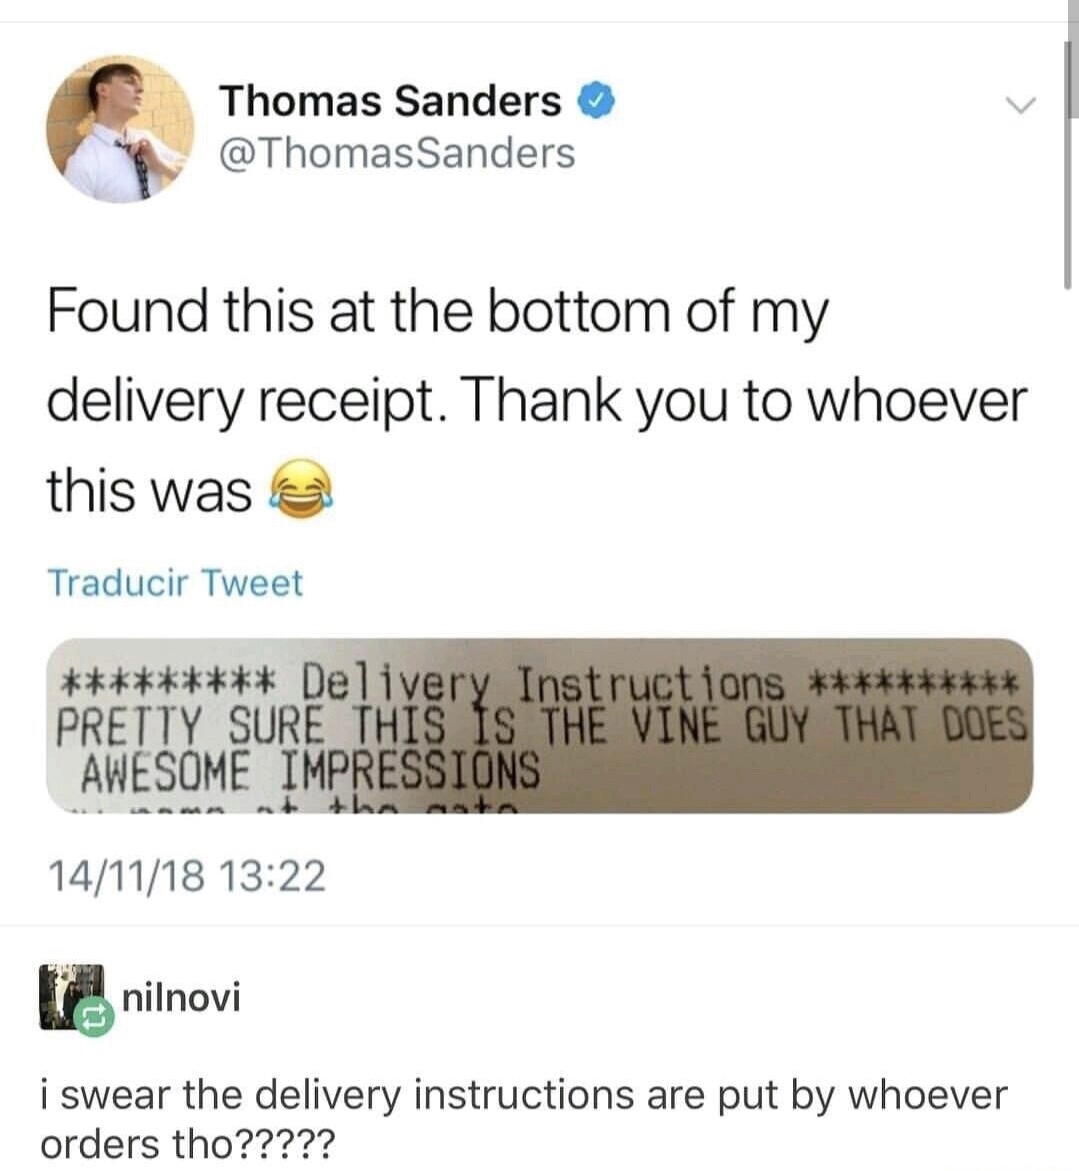 memes - document - Thomas Sanders Found this at the bottom of my delivery receipt. Thank you to whoever this was Traducir Tweet Delivery Instructions Pretty Sure This Is The Vine Guy That Does Awesome Impressions 141118 nilnovi i swear the delivery instru